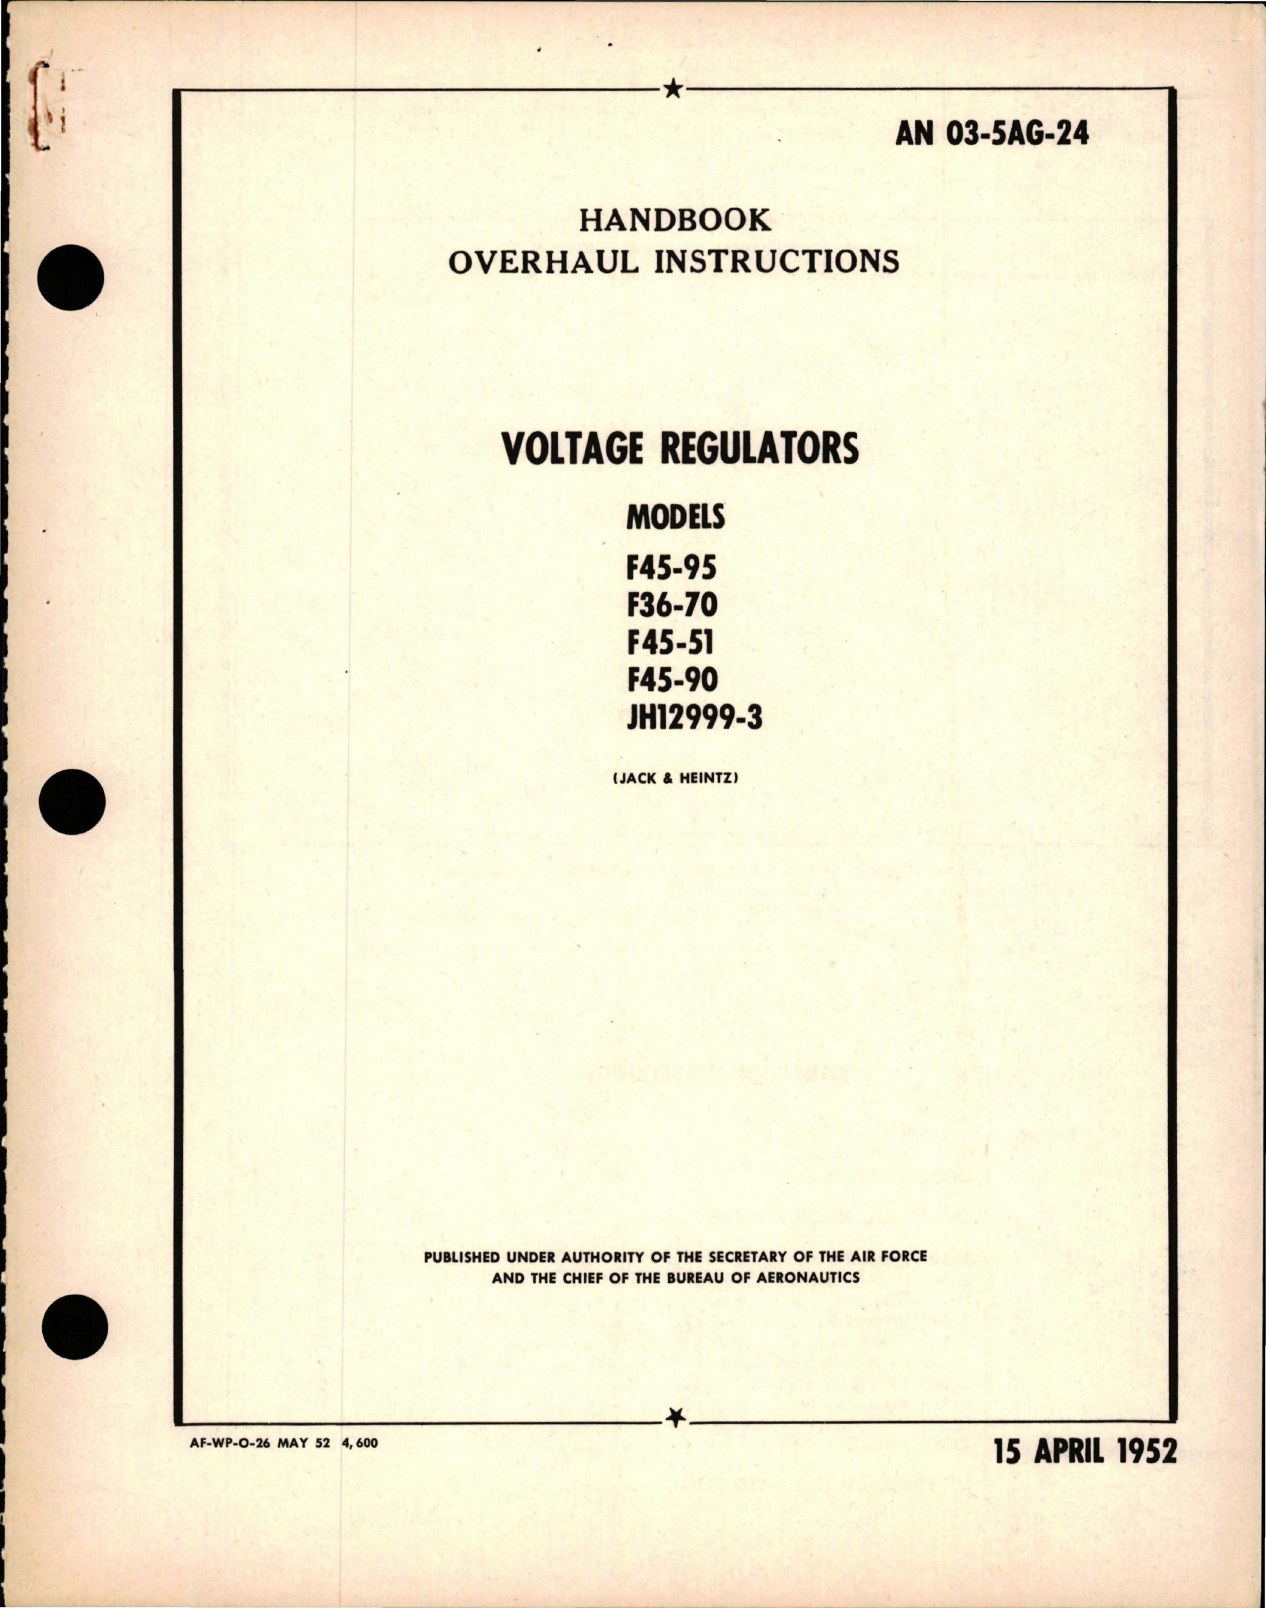 Sample page 1 from AirCorps Library document: Overhaul Instructions for Voltage Regulators - Models F45-95, F36-70, F45-51, F45-90, and JH12999-3